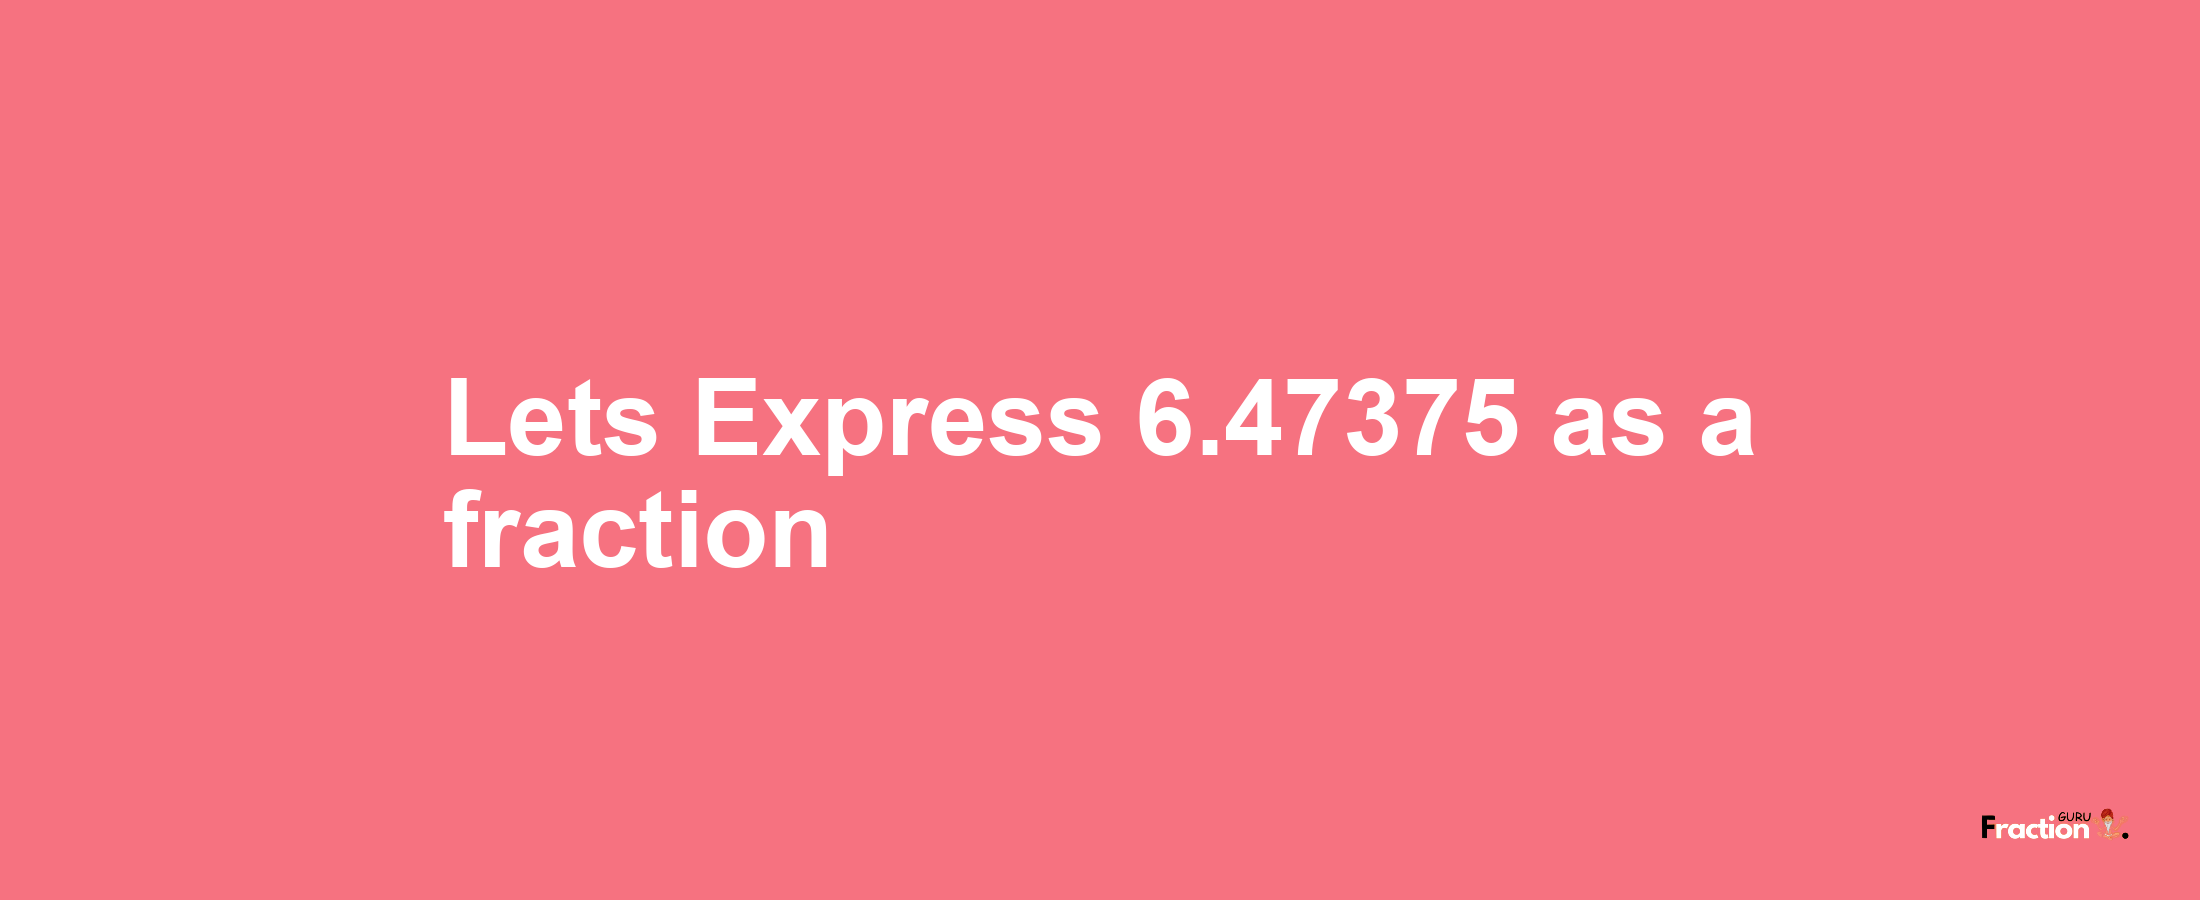 Lets Express 6.47375 as afraction